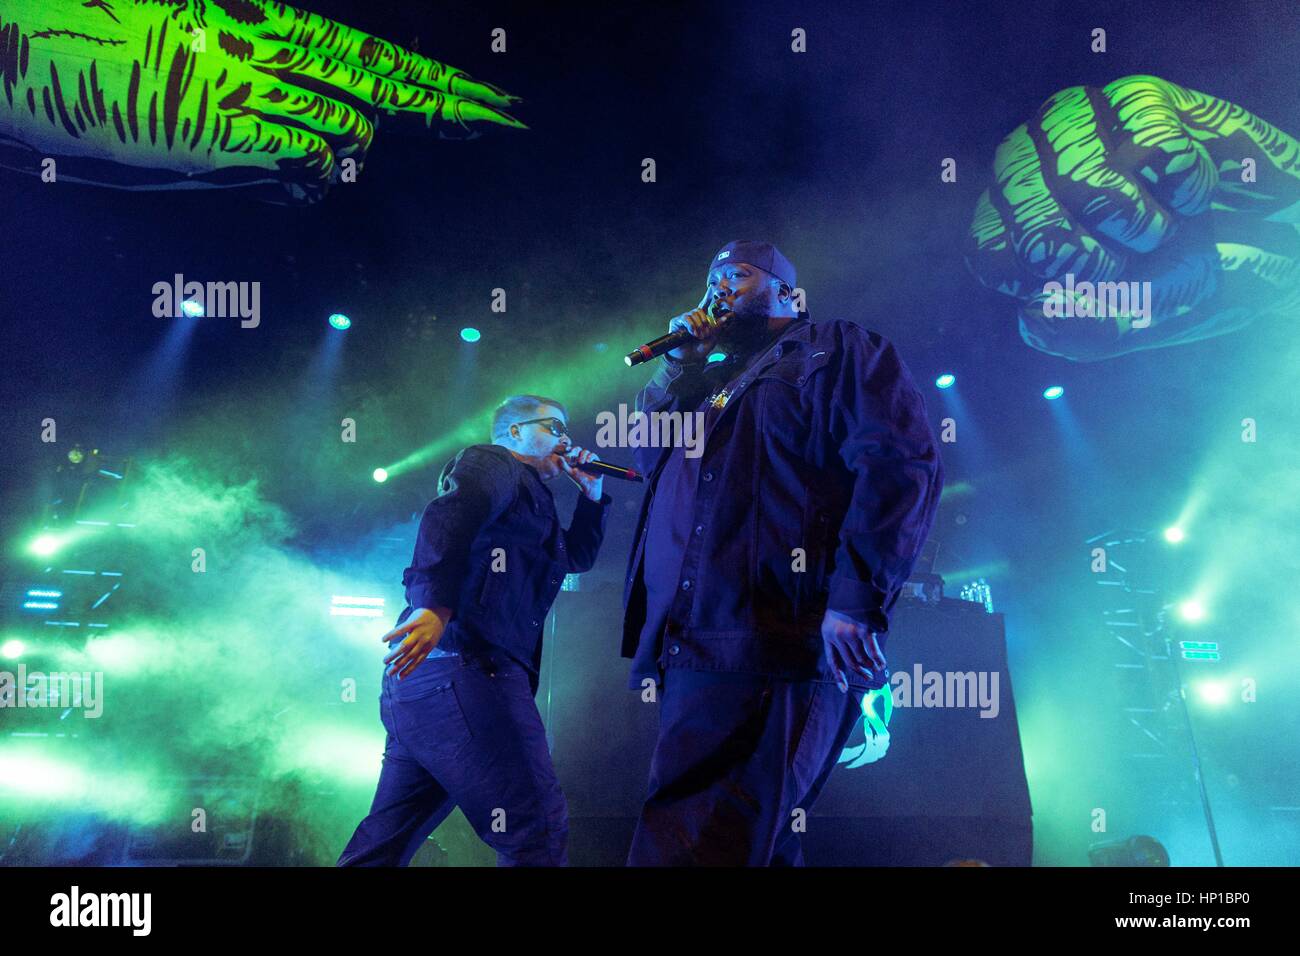 Madison, Wisconsin, USA. 15th Feb, 2017. EL-P (JAIME MELINE) and KILLER MIKE (MICHAEL RENDER) of Run The Jewels at the Orpheum Theater in Madison, Wisconsin Credit: Daniel DeSlover/ZUMA Wire/Alamy Live News Stock Photo